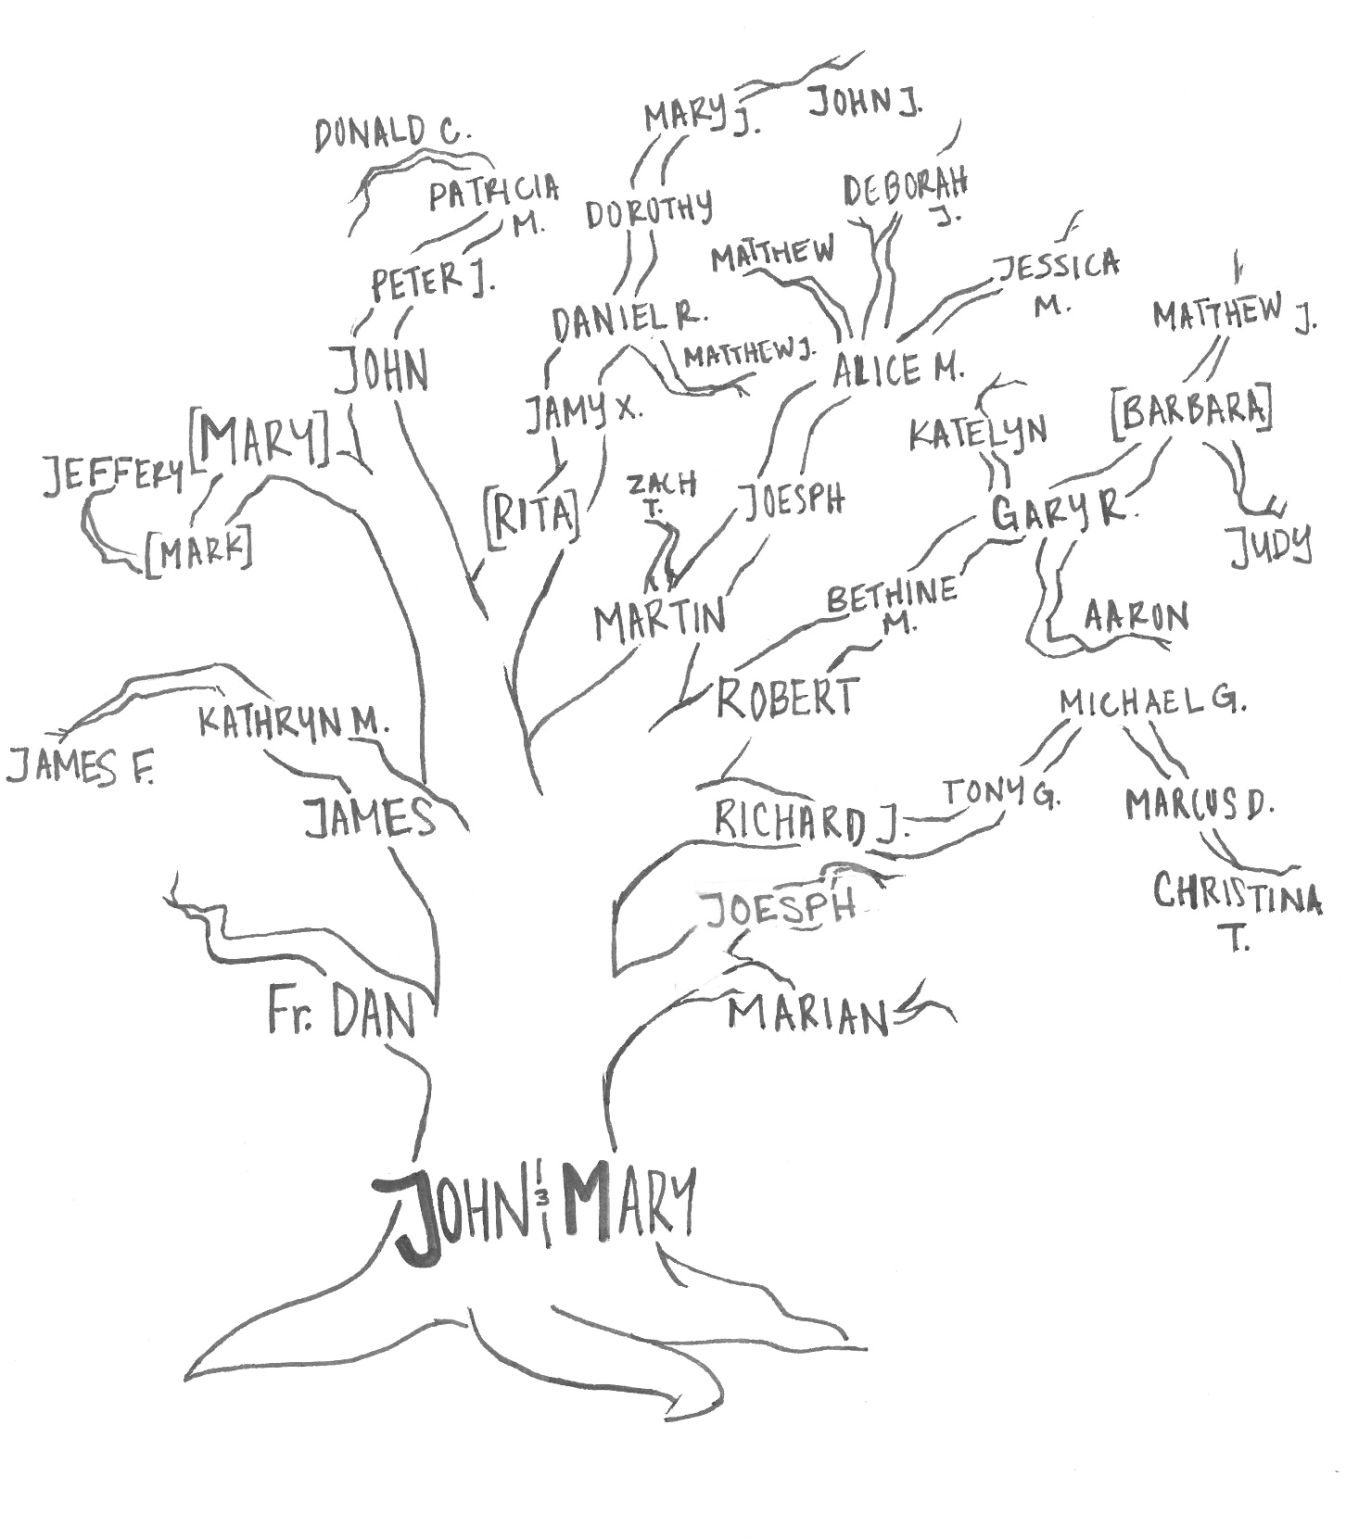 How to make a family tree on paper - Quora